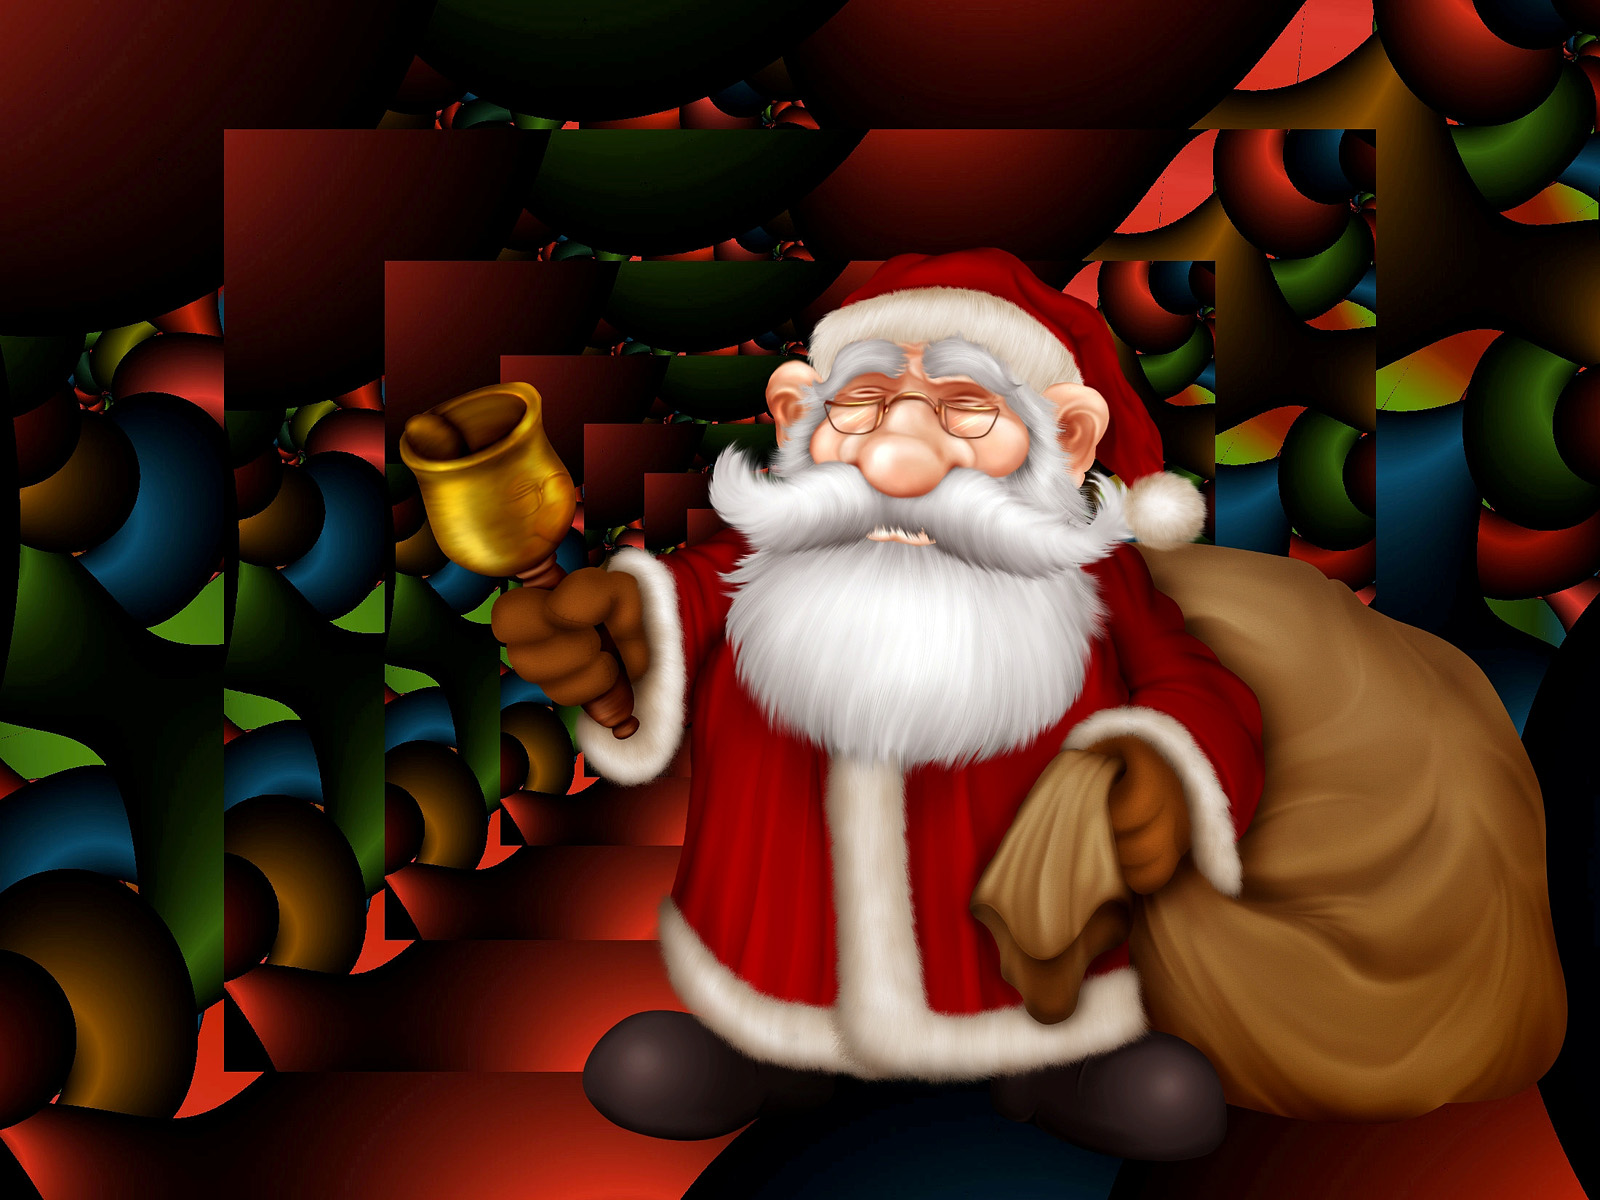 hIGH dEFINITION mOST bEAUTIFUL cHRISTMAS wALLPAPERS fOR ...